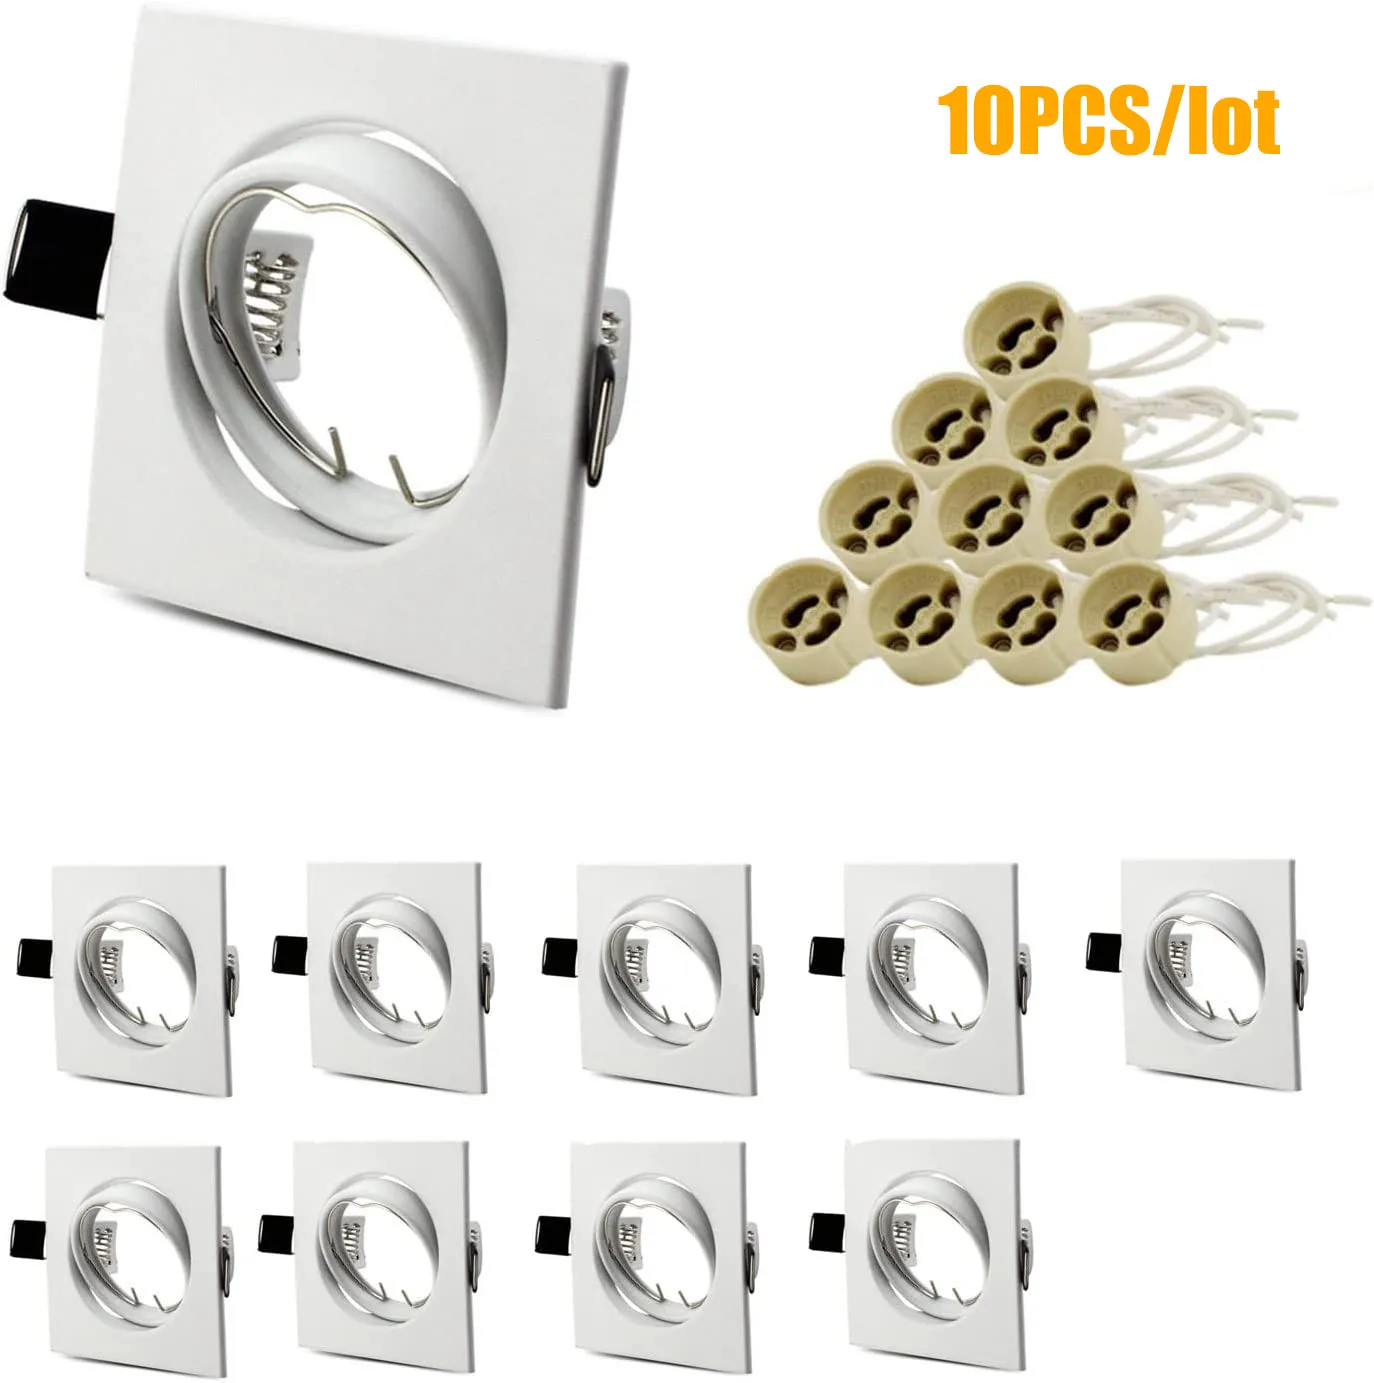 

5/10PCS Square Recessed Downlight LED Ceiling Light GU10 Bulb Holder Base Cutout 50MM Mounting Frame Spot Light Fitting Fixtures